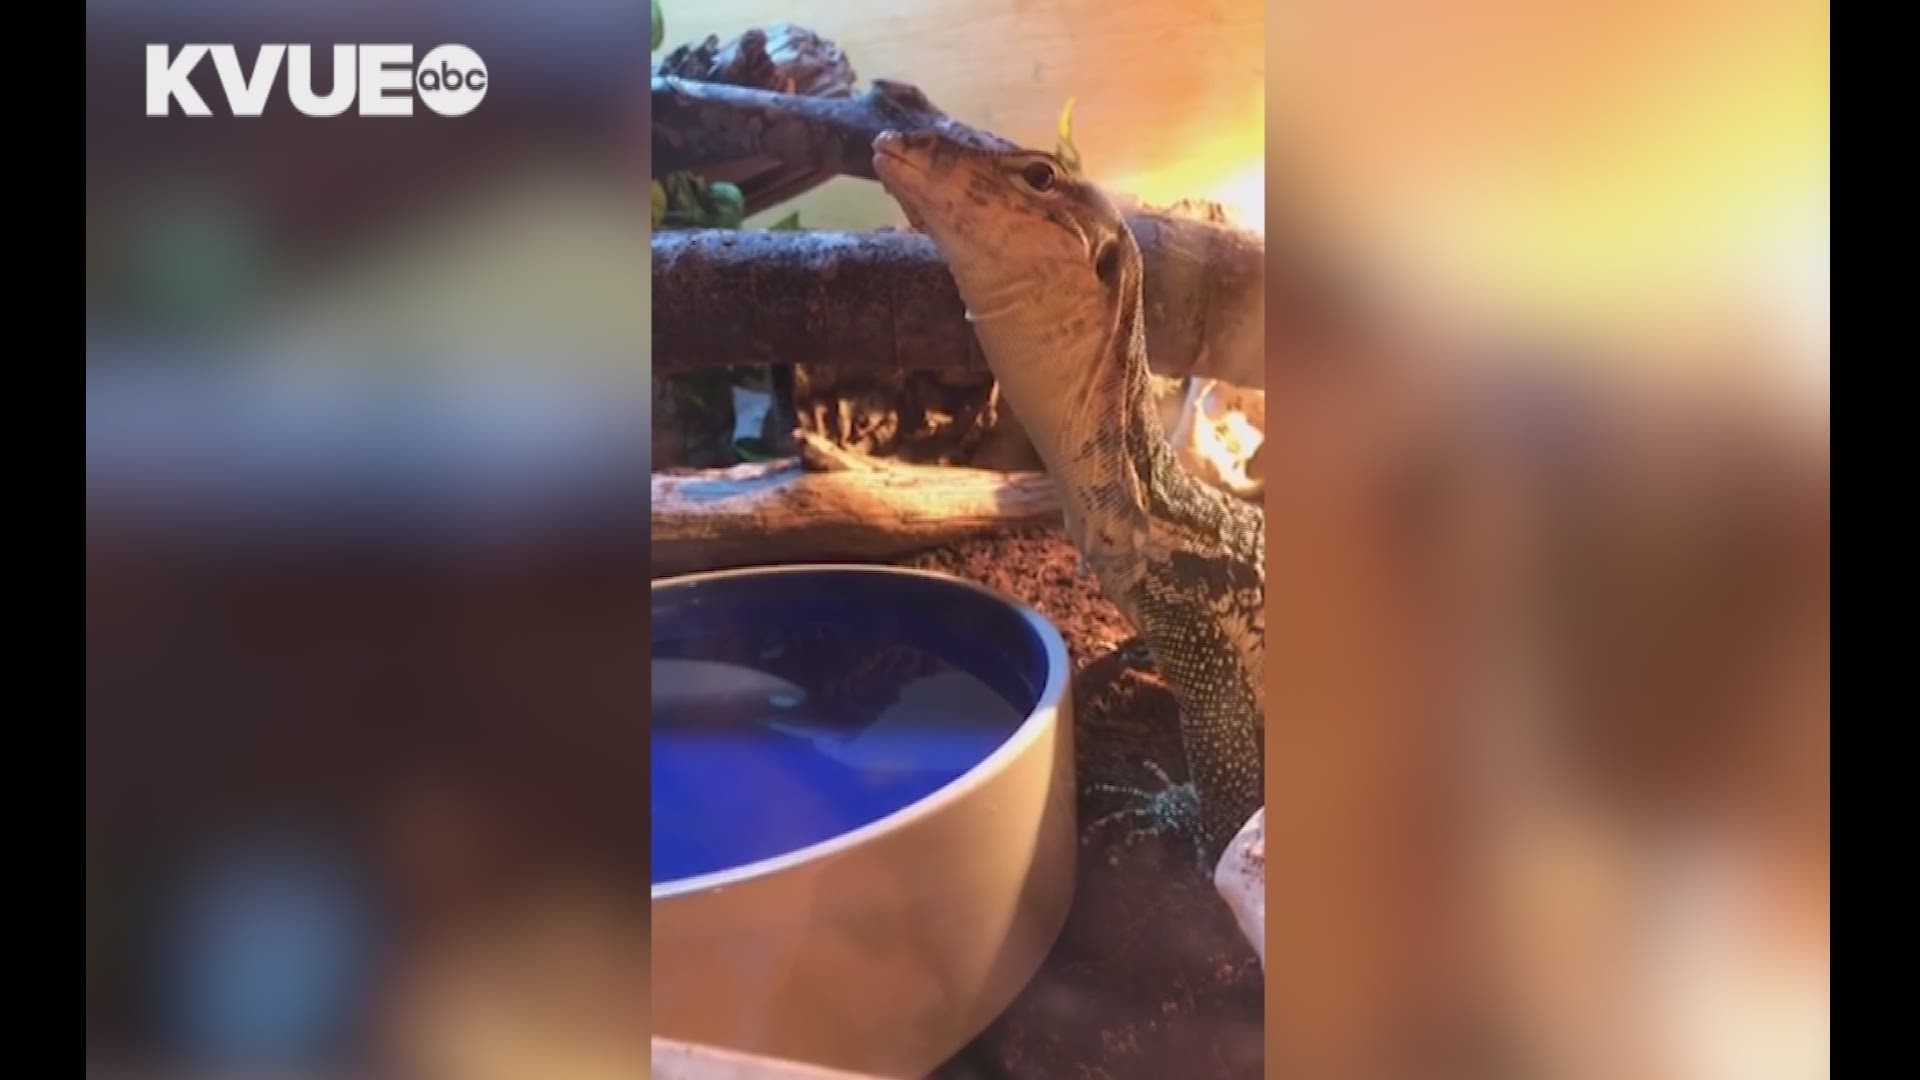 "Darby" is over four feet long and 15 pounds. He escaped from his temporary enclosure, and Williamson County deputies are looking for him. Video courtesy of his owner.